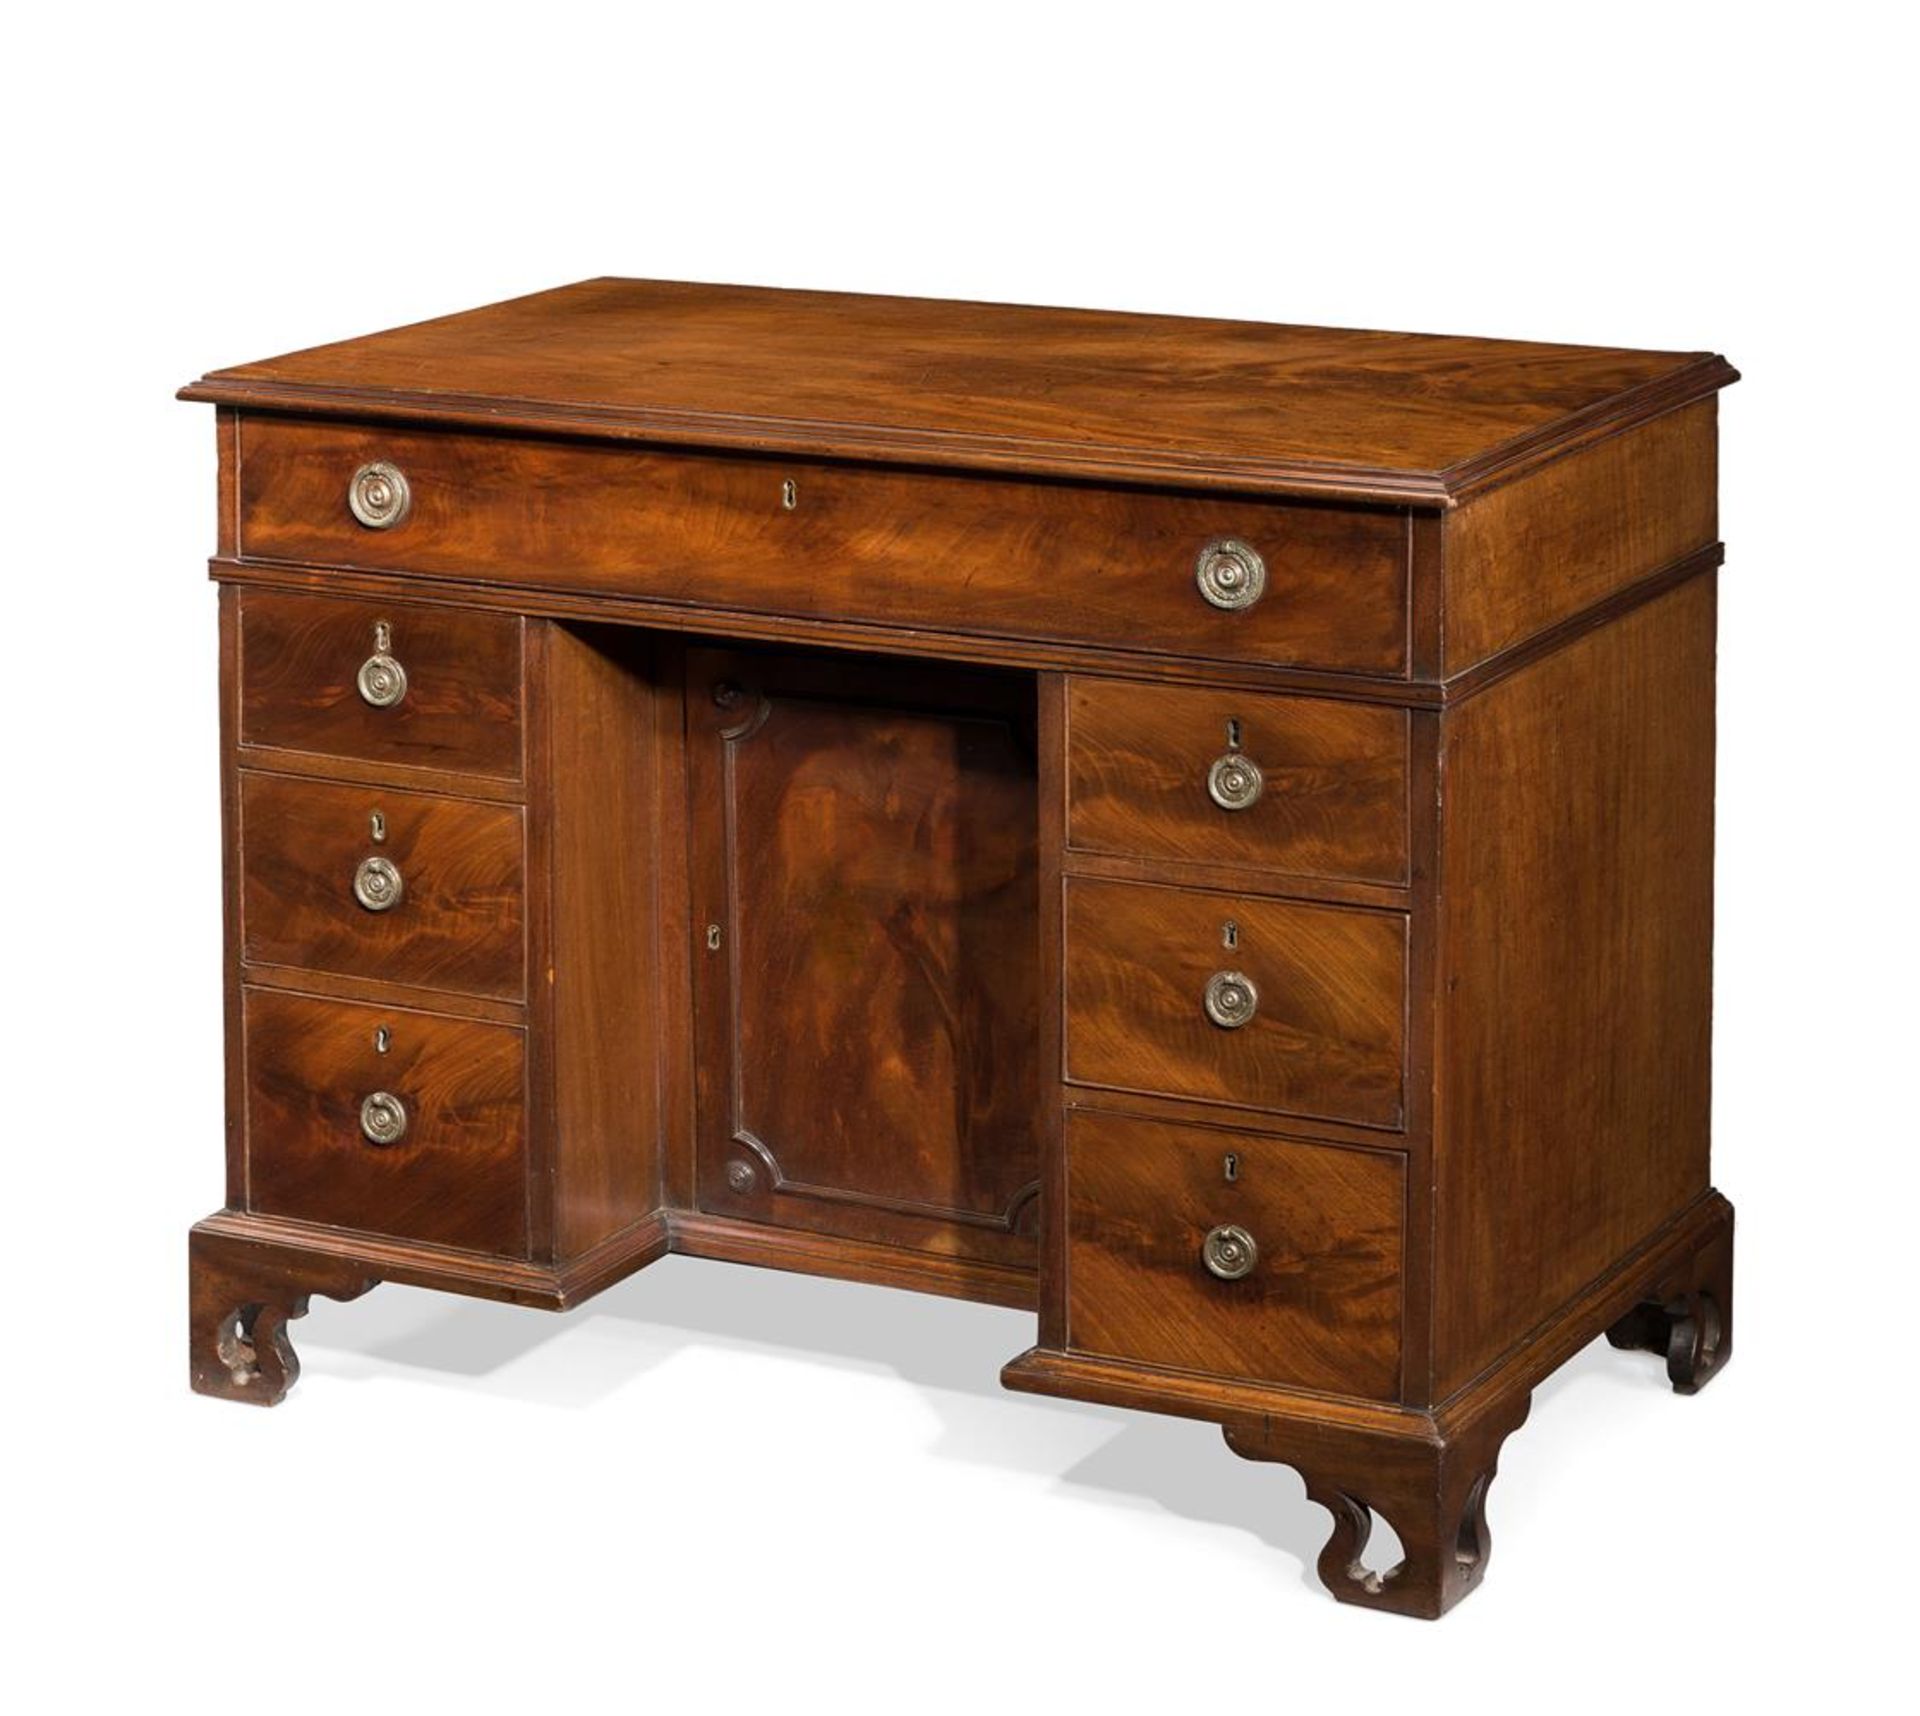 A GEORGE III MAHOGANY KNEEHOLE DESK IN THE MANNER OF THOMAS CHIPPENDALE, CIRCA 1780 - Image 2 of 9